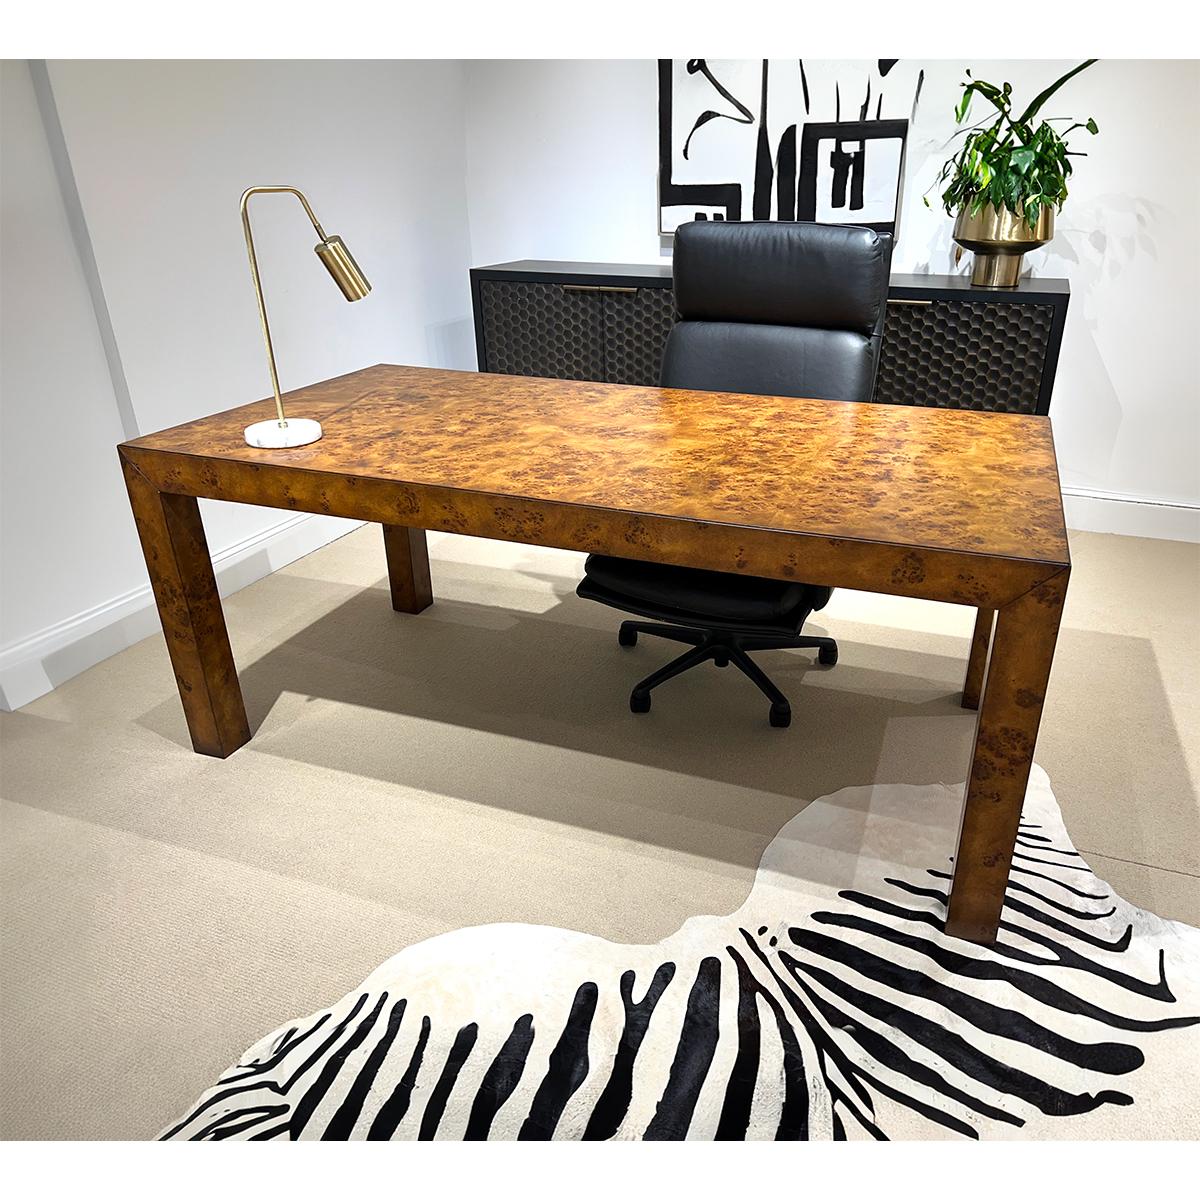 A Modern burl wood dining table, with Parsons style legs, one drawer, a 'rustic' warm brown finish with subtle distressing and a hand-rubbed finish.

Dimensions: 72